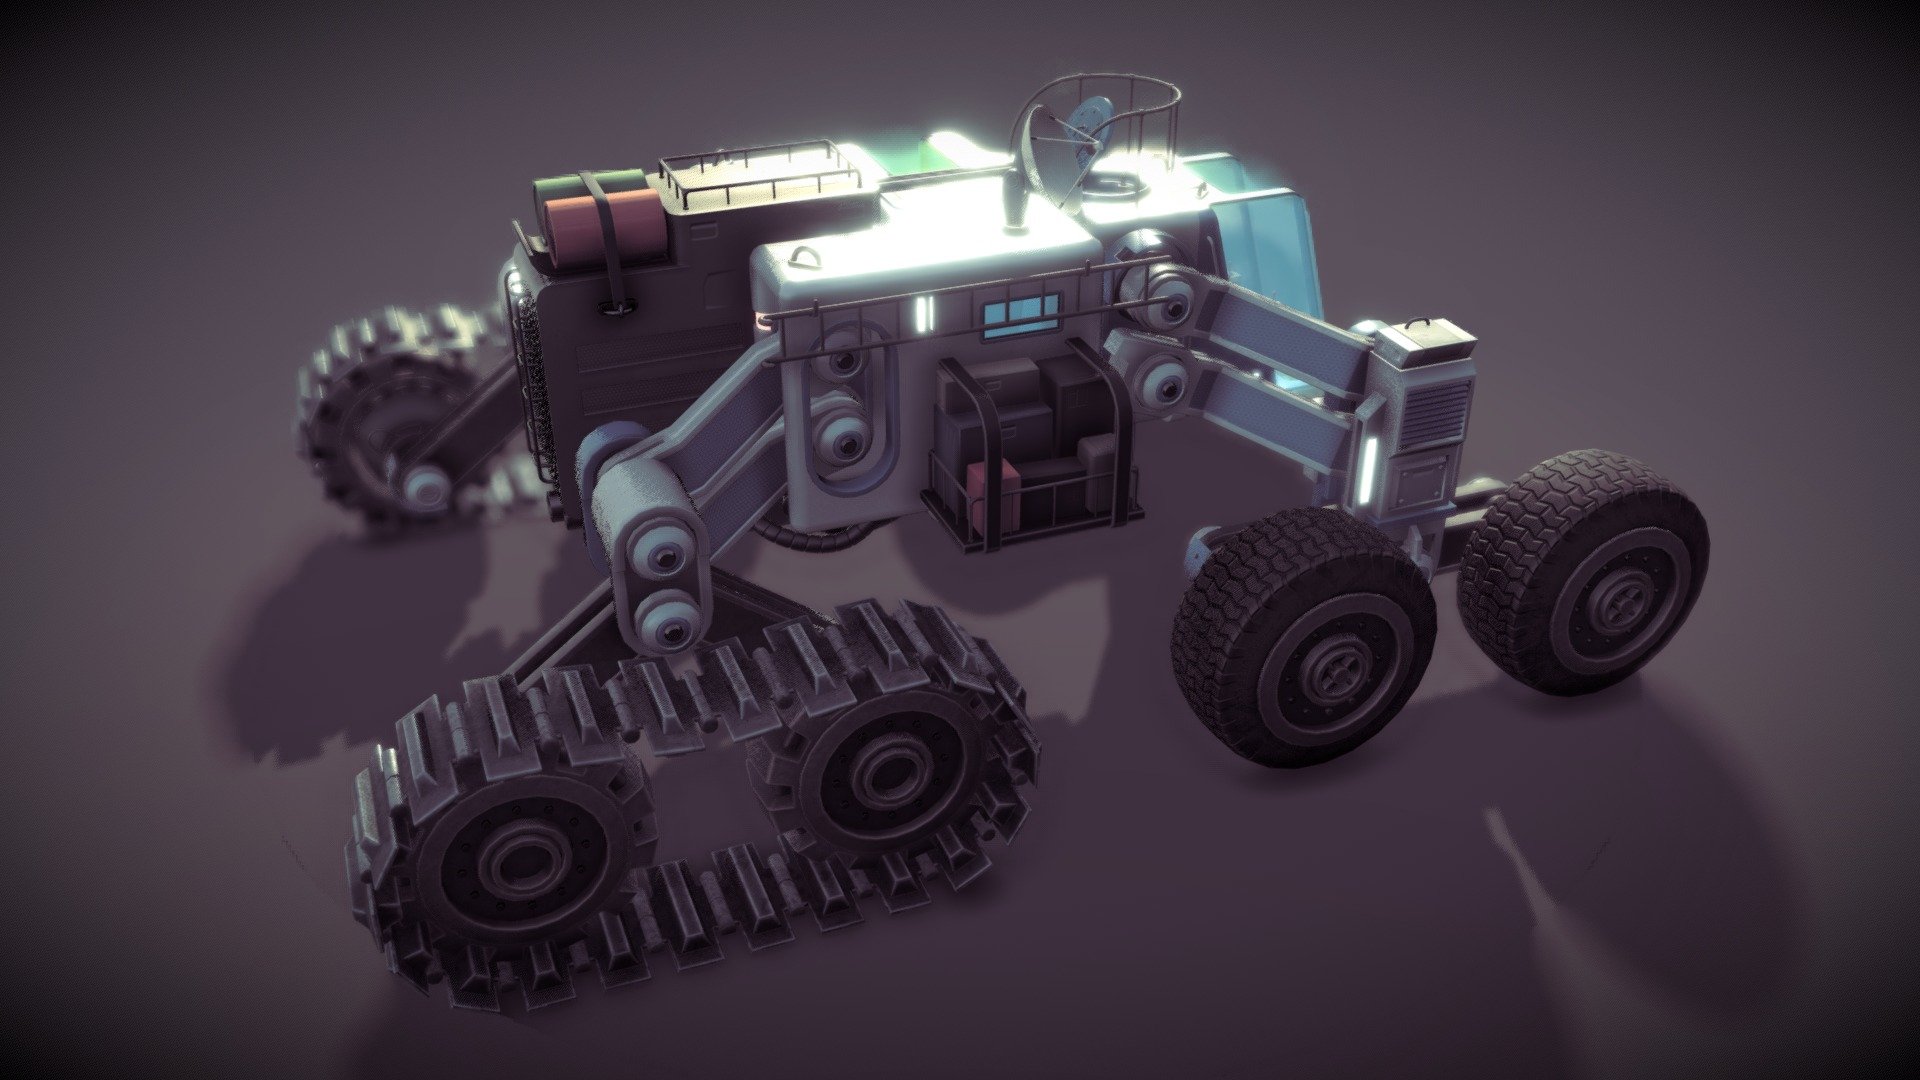 This was a personal project I worked on in my spare time over the course of a few weeks, and was my take on what a futuristic, all-terrain space exploration vehicle might look like.

The eight-wheeled mechanism was heavily inspired by the Daihotai Tractor from the movie Aliens (as used by the Jordan family on the Hadley's Hope colony).

If you purchase this model then please send me a message to tell me about your project, I'd love to see what you create with it! - Eight-wheeled Space Exploration ATV - Buy Royalty Free 3D model by se7en23 3d model